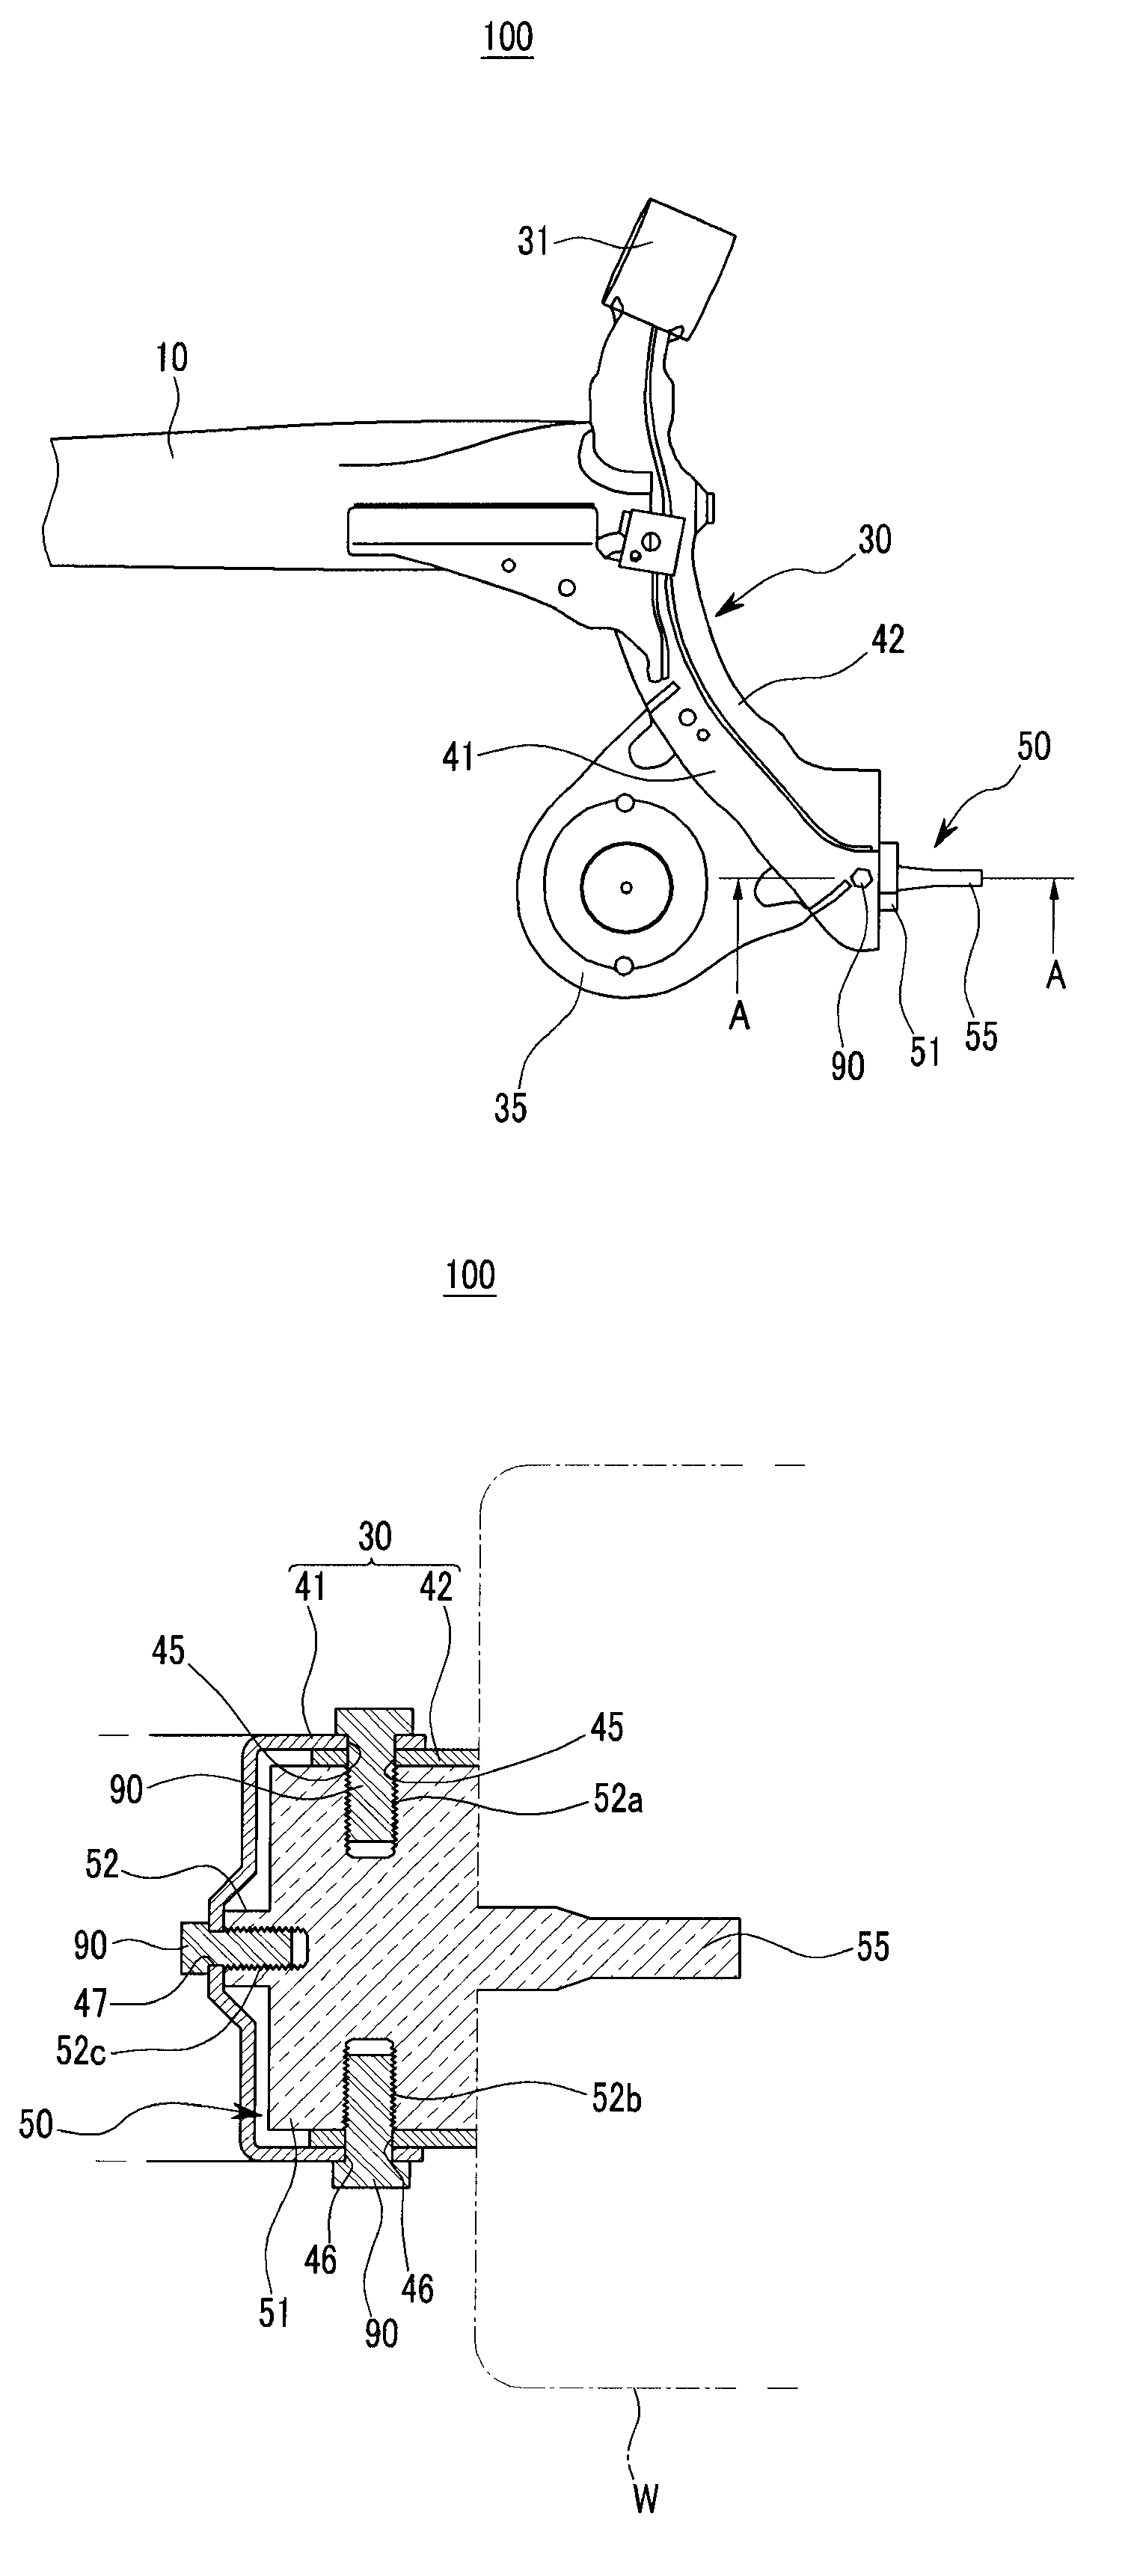 Suspension System of Coupled Torsion Beam Axle